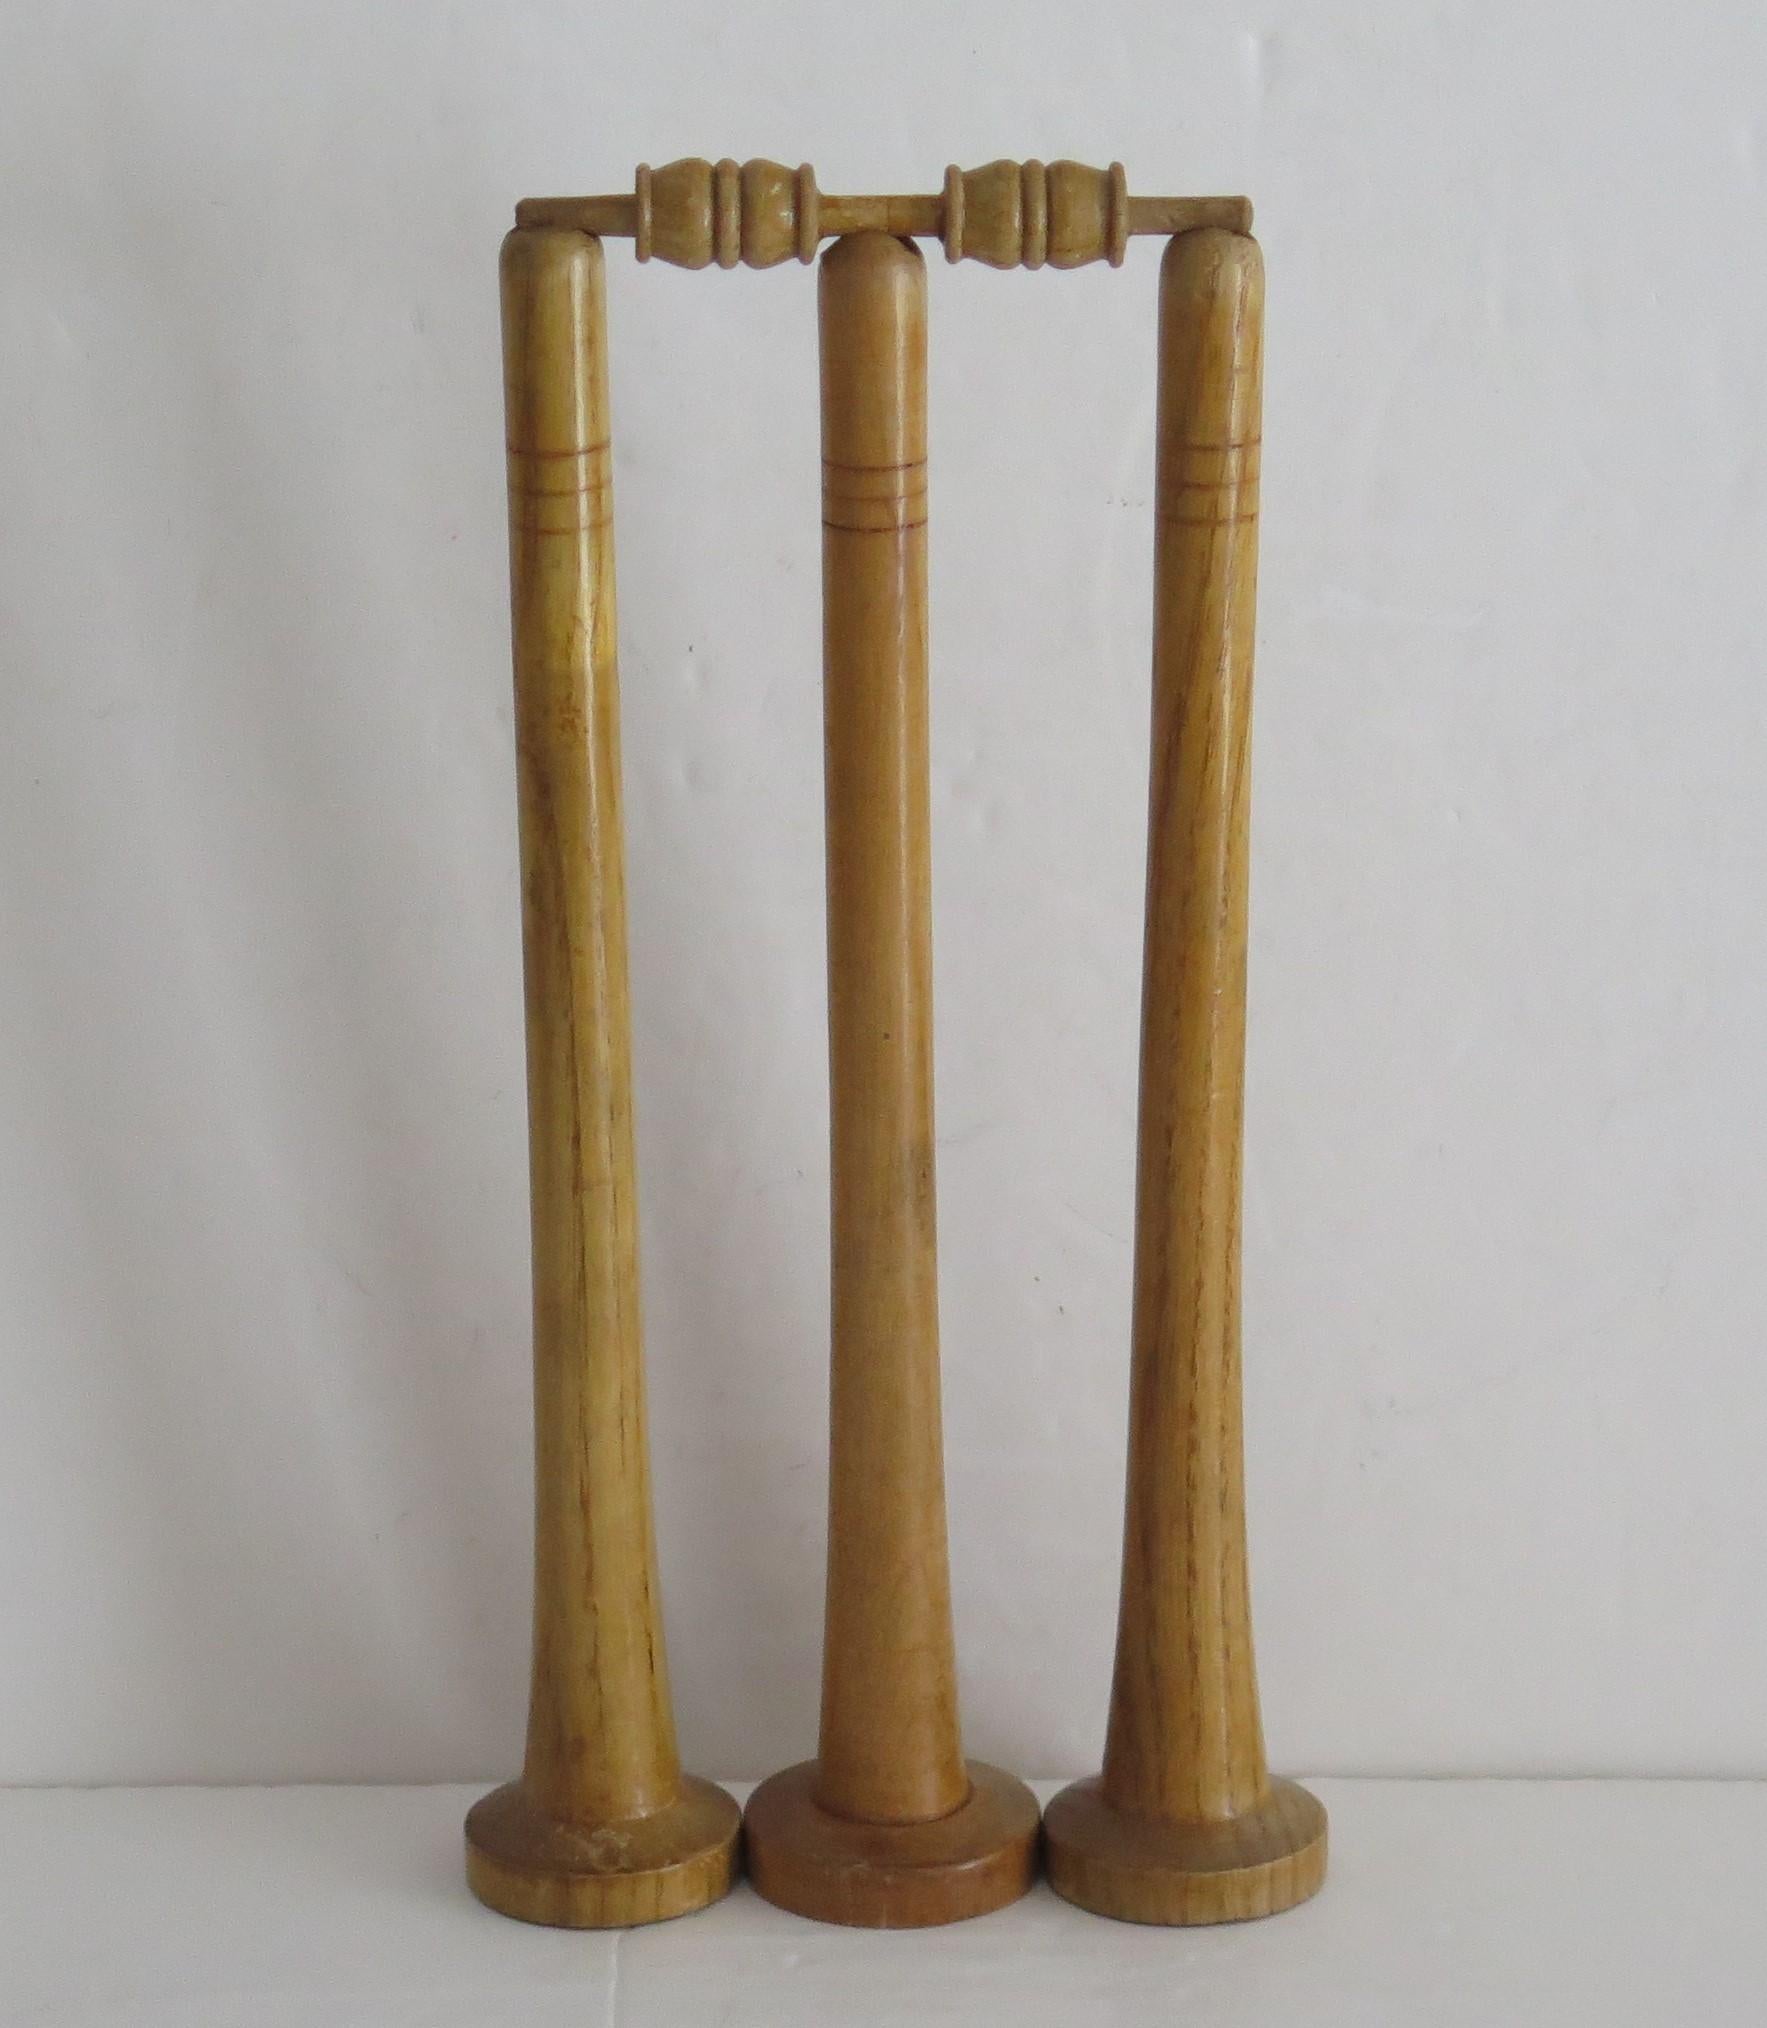 This is an original wooden Cricket Game, all handmade, comprising 18 pieces, for indoor use on a table or carpet, all dating to the late 19th or early 20th century, circa 1900.

This is a classic indoor game of strategy and skill, fun to play for